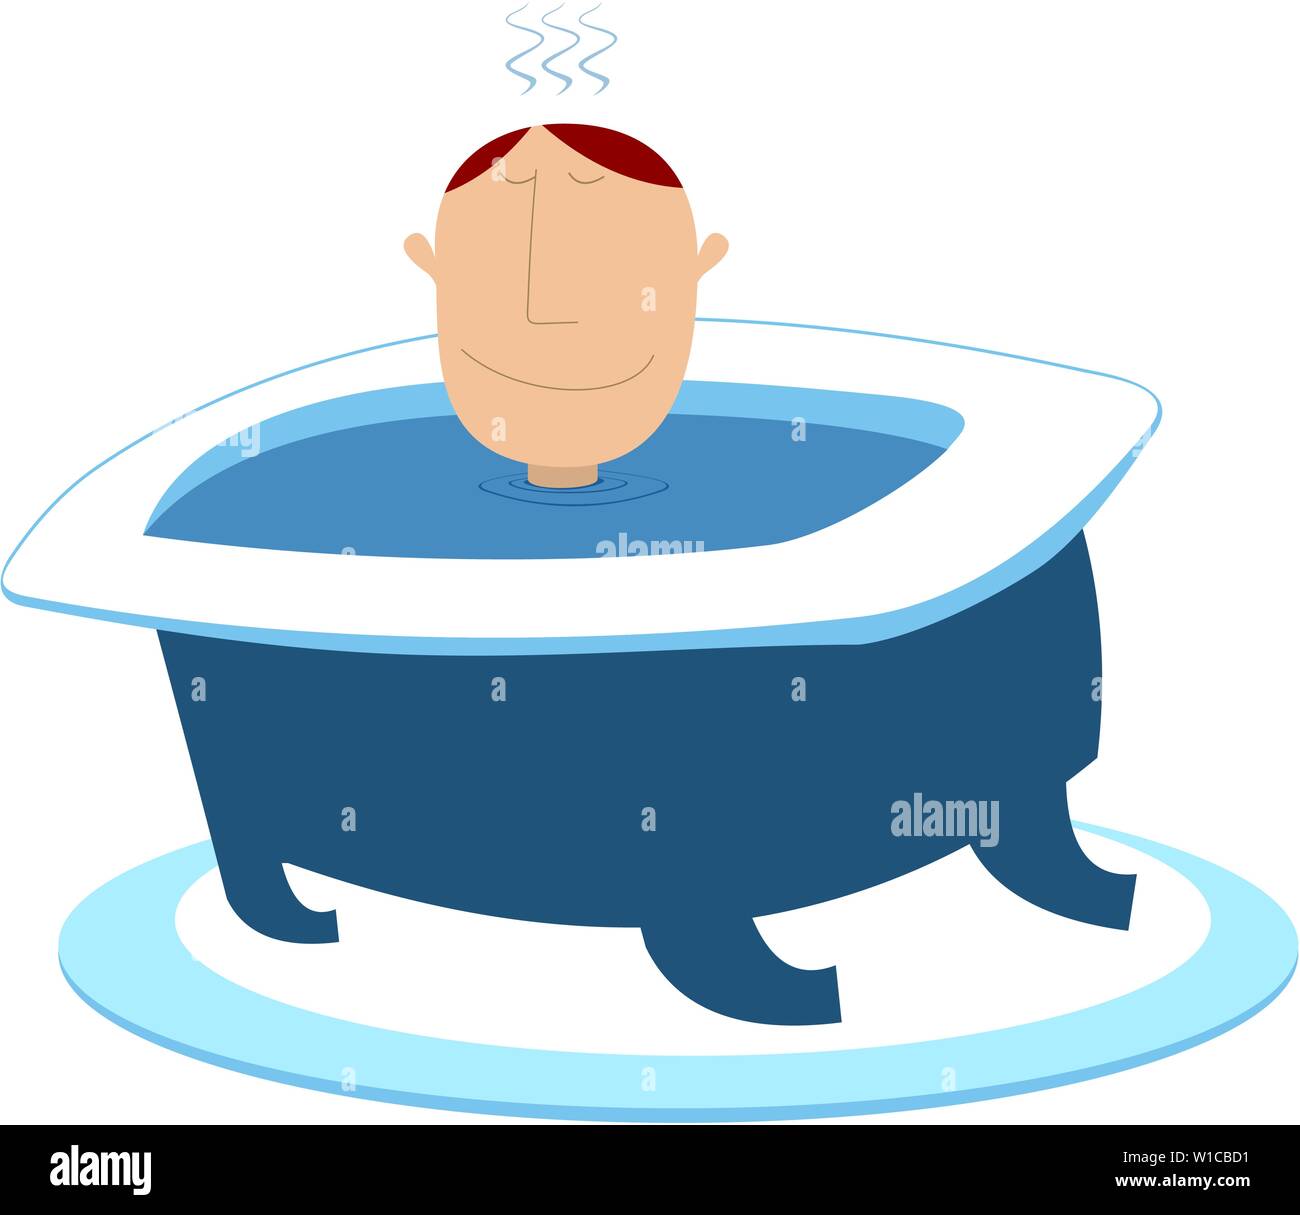 Man takes a bath illustration. Head of the man appears from the water in the bathtub isolated on white Stock Vector